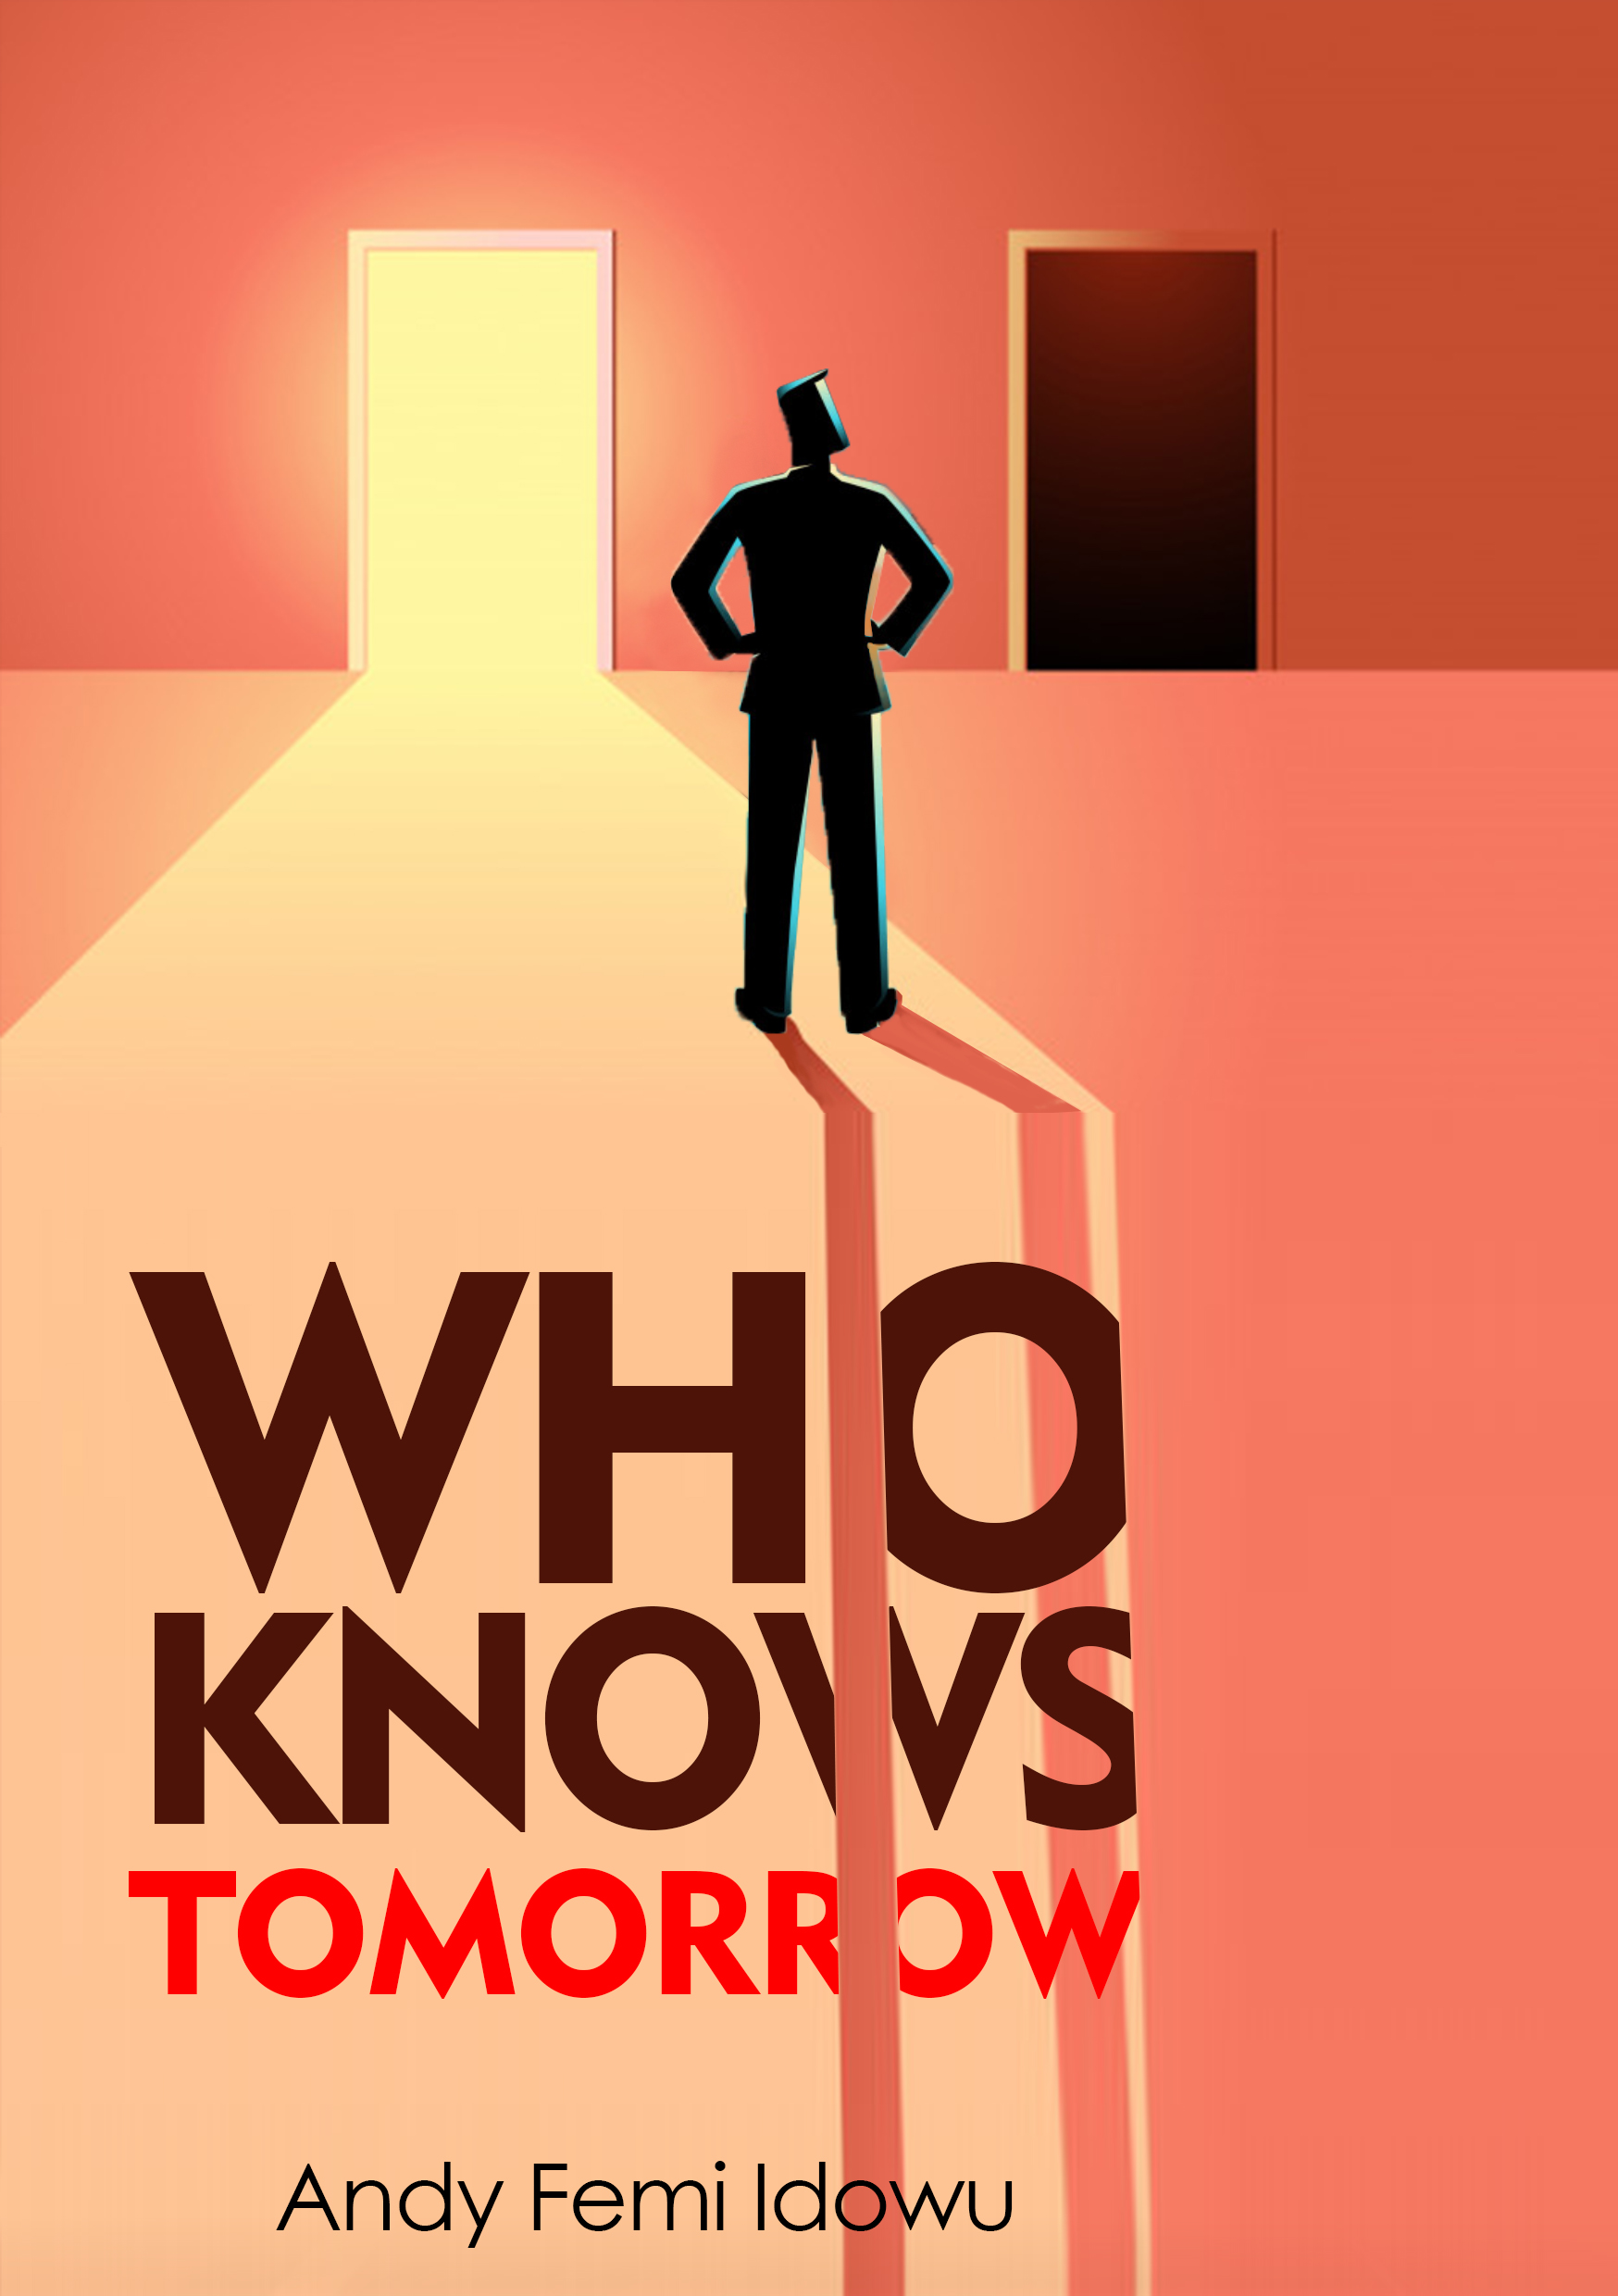 Who knows tomorrow